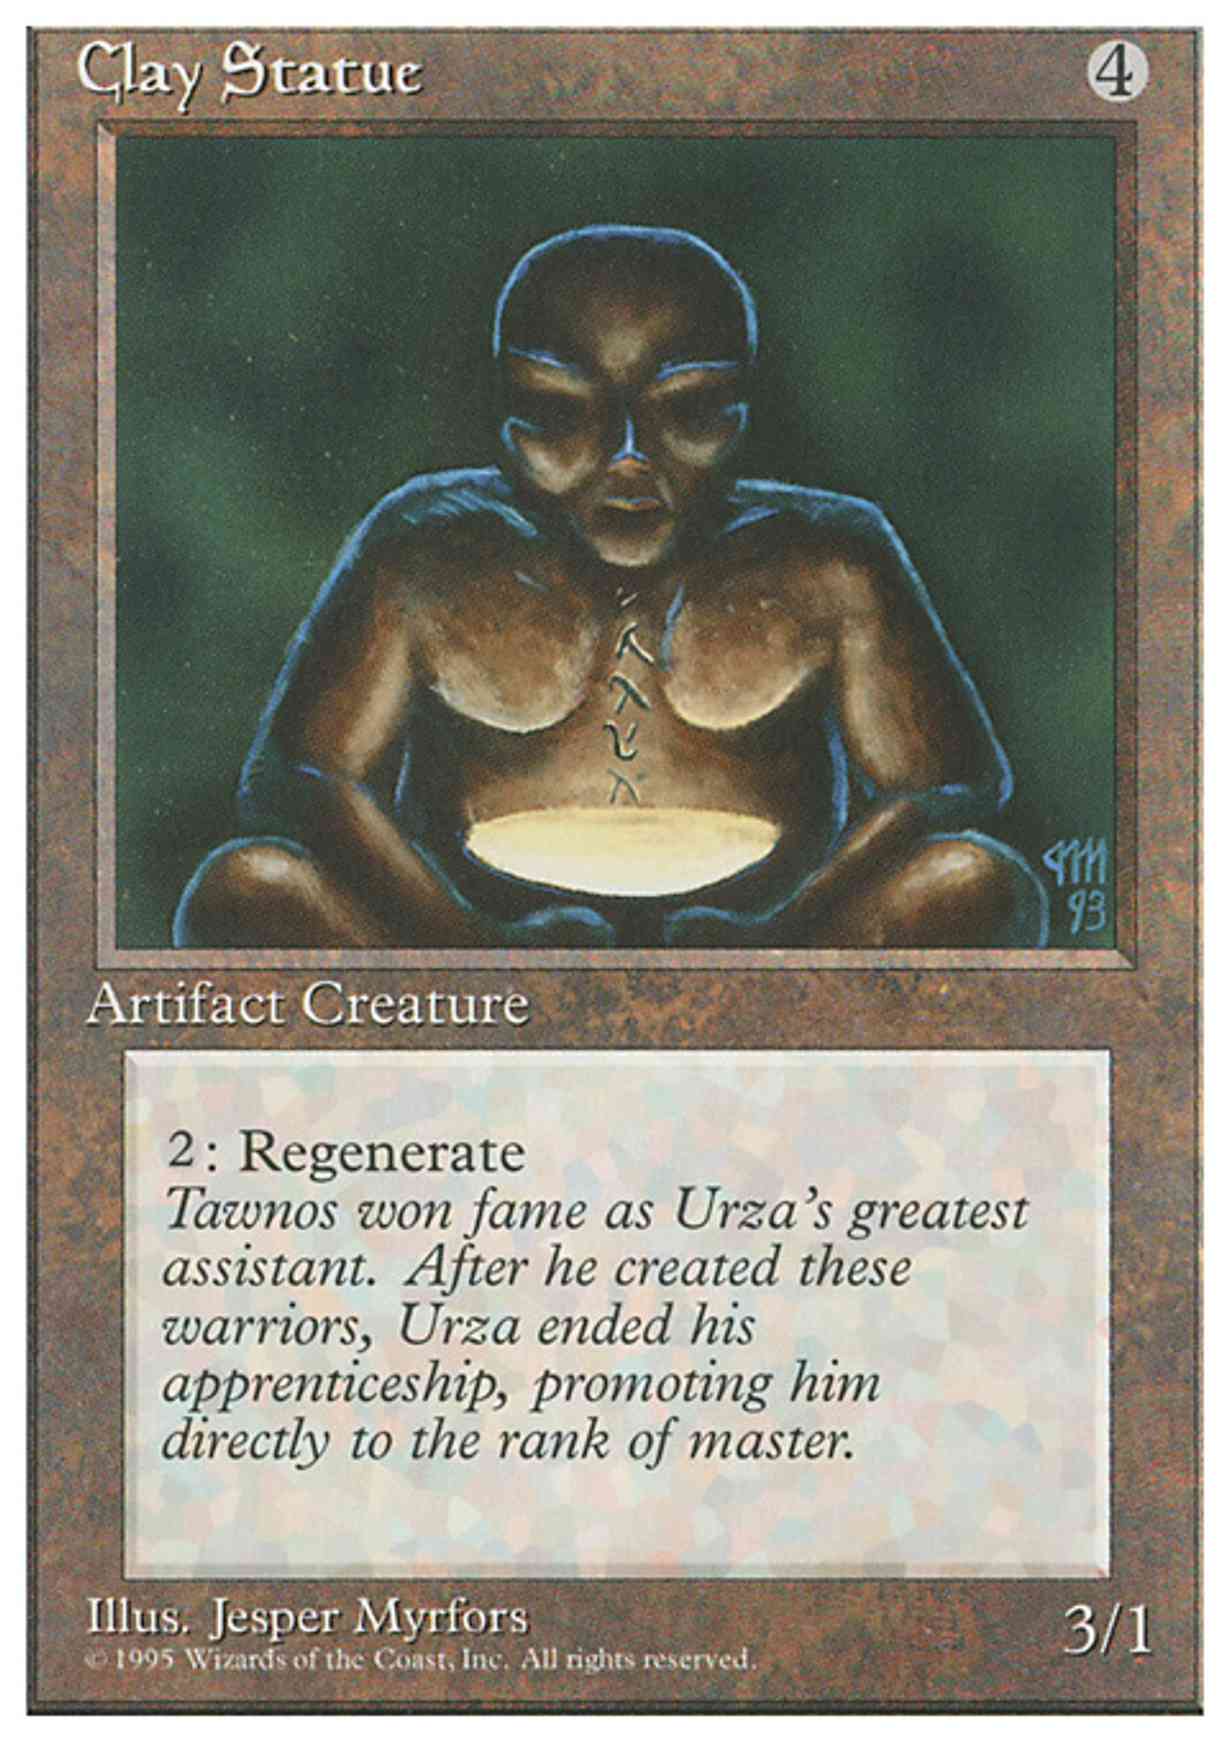 Clay Statue magic card front